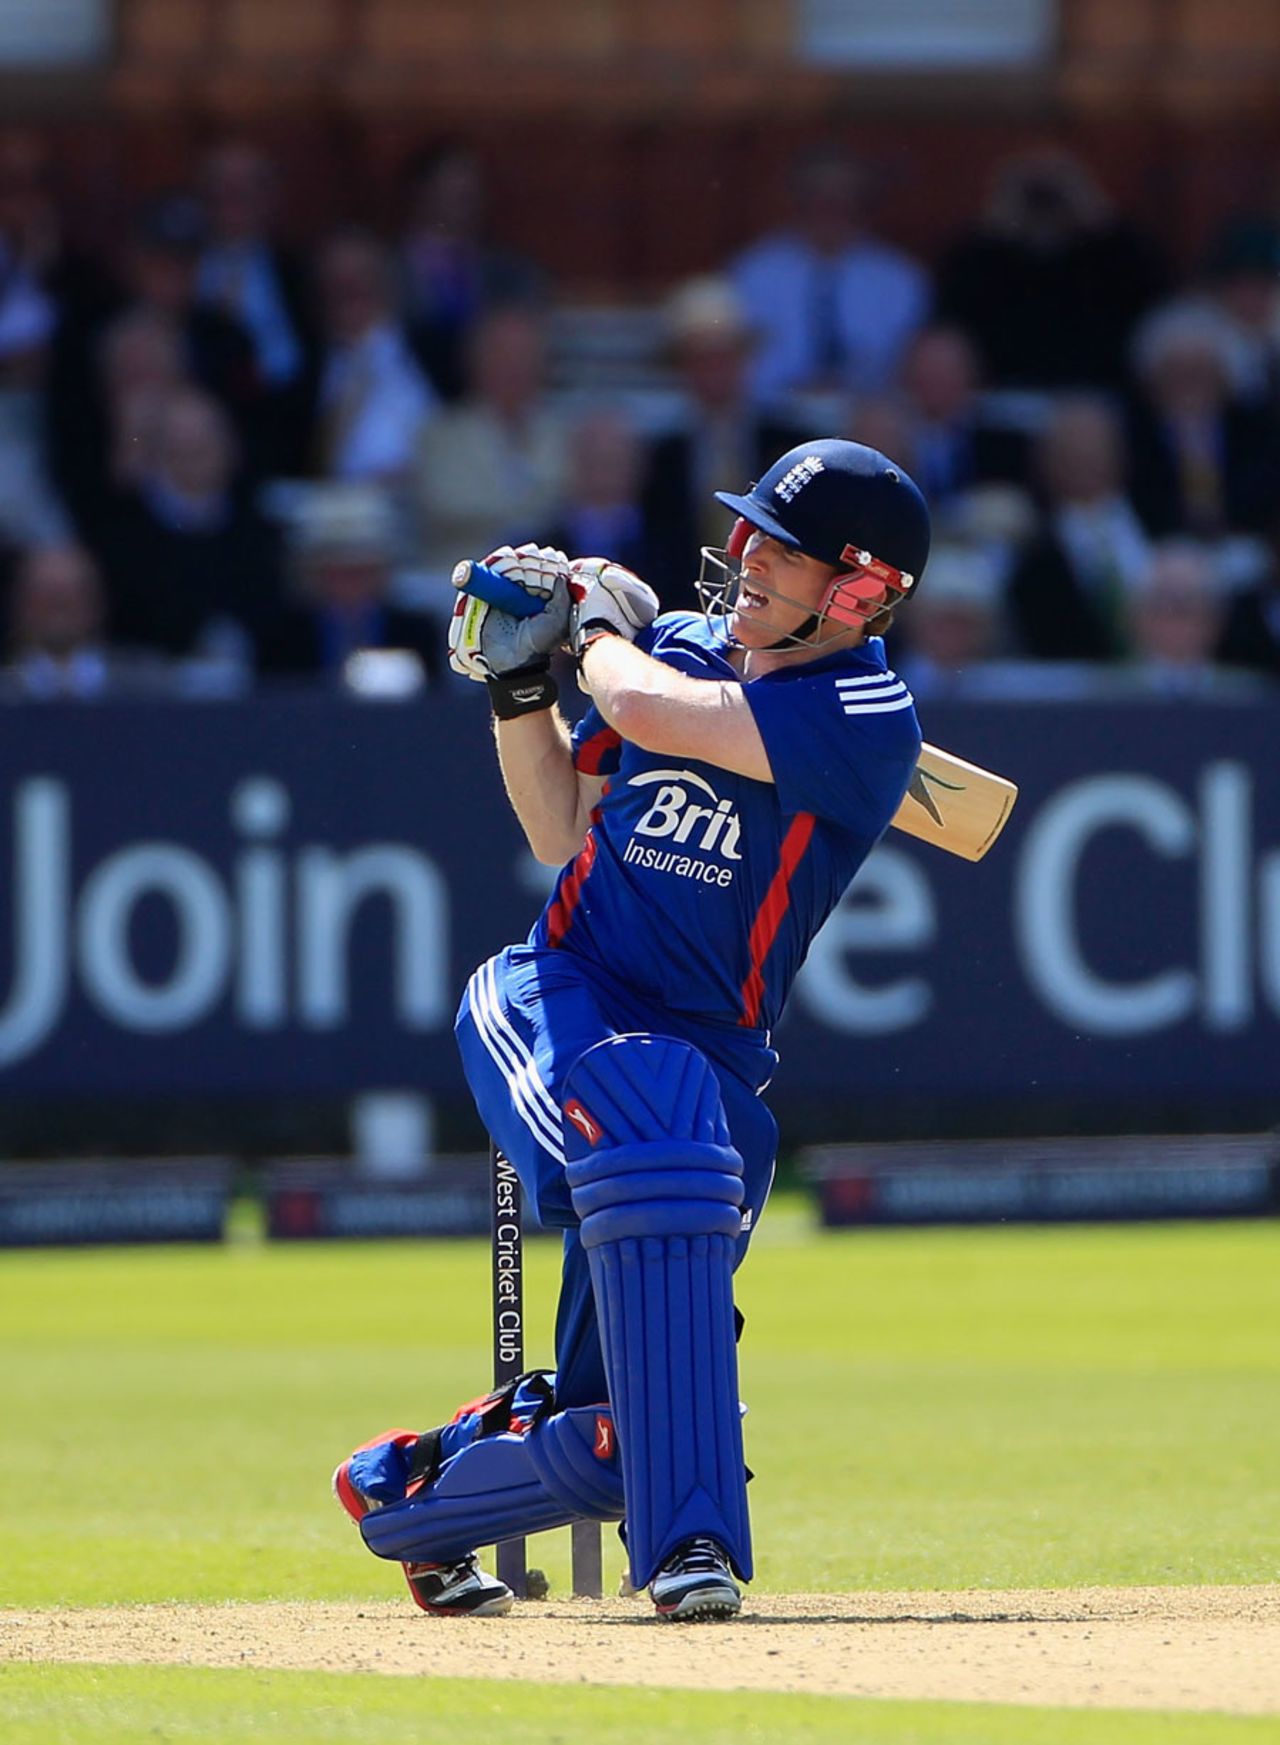 Eoin Morgan hit four sixes in his unbeaten innings of 89, England v Australia, 1st ODI, Lord's, June 29, 2012